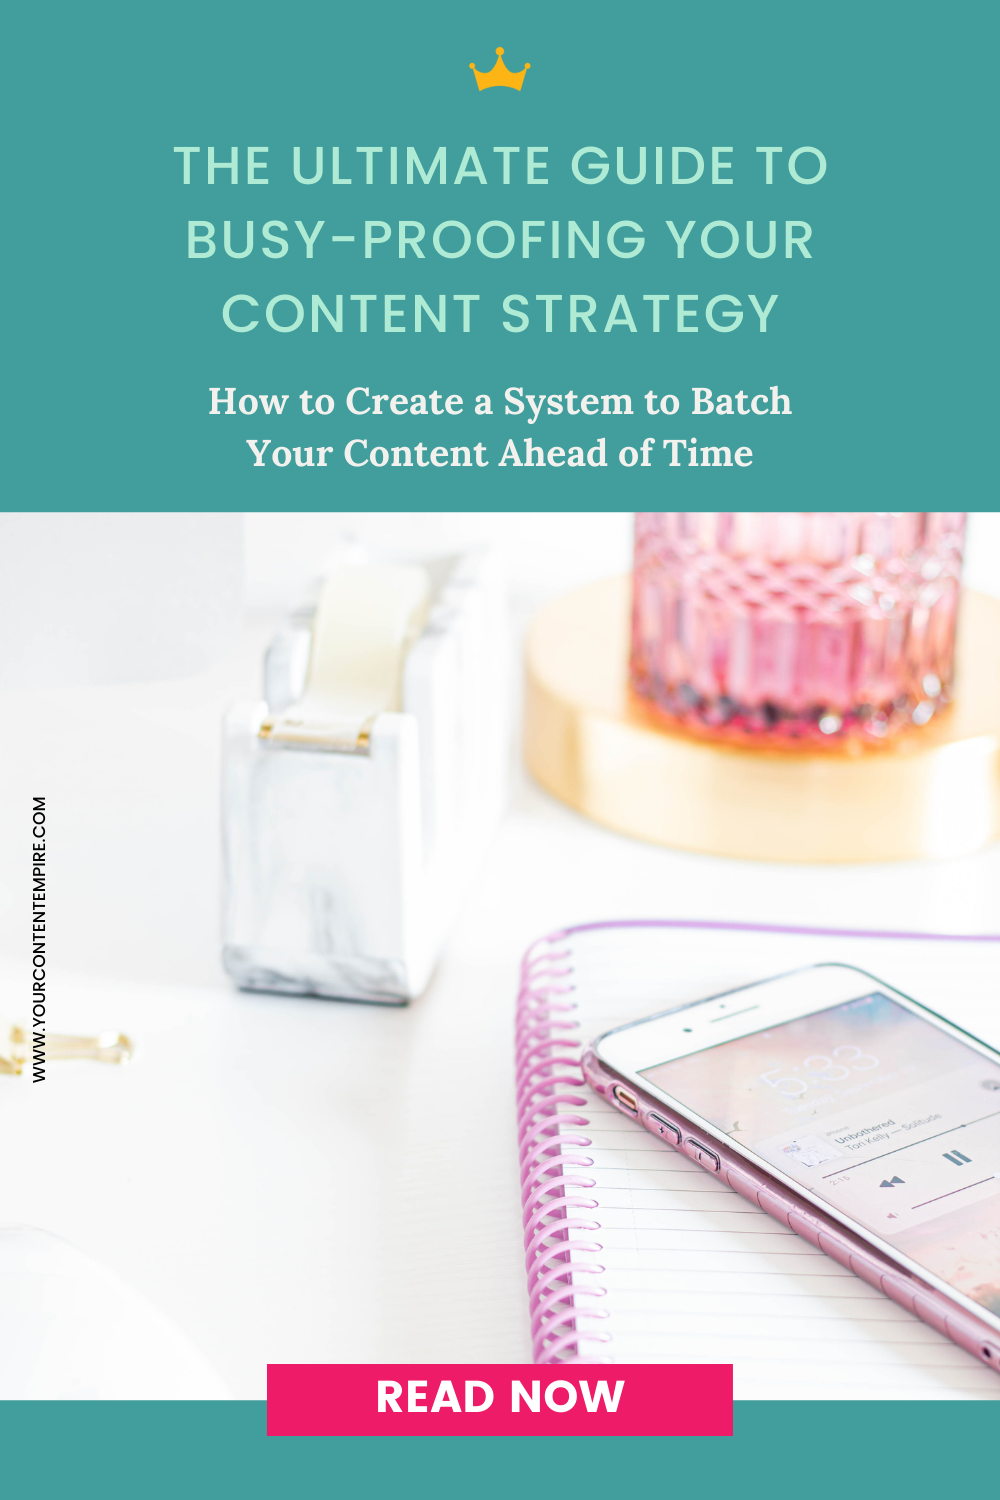 The Ultimate Guide to Busy-Proofing Your Content Strategy